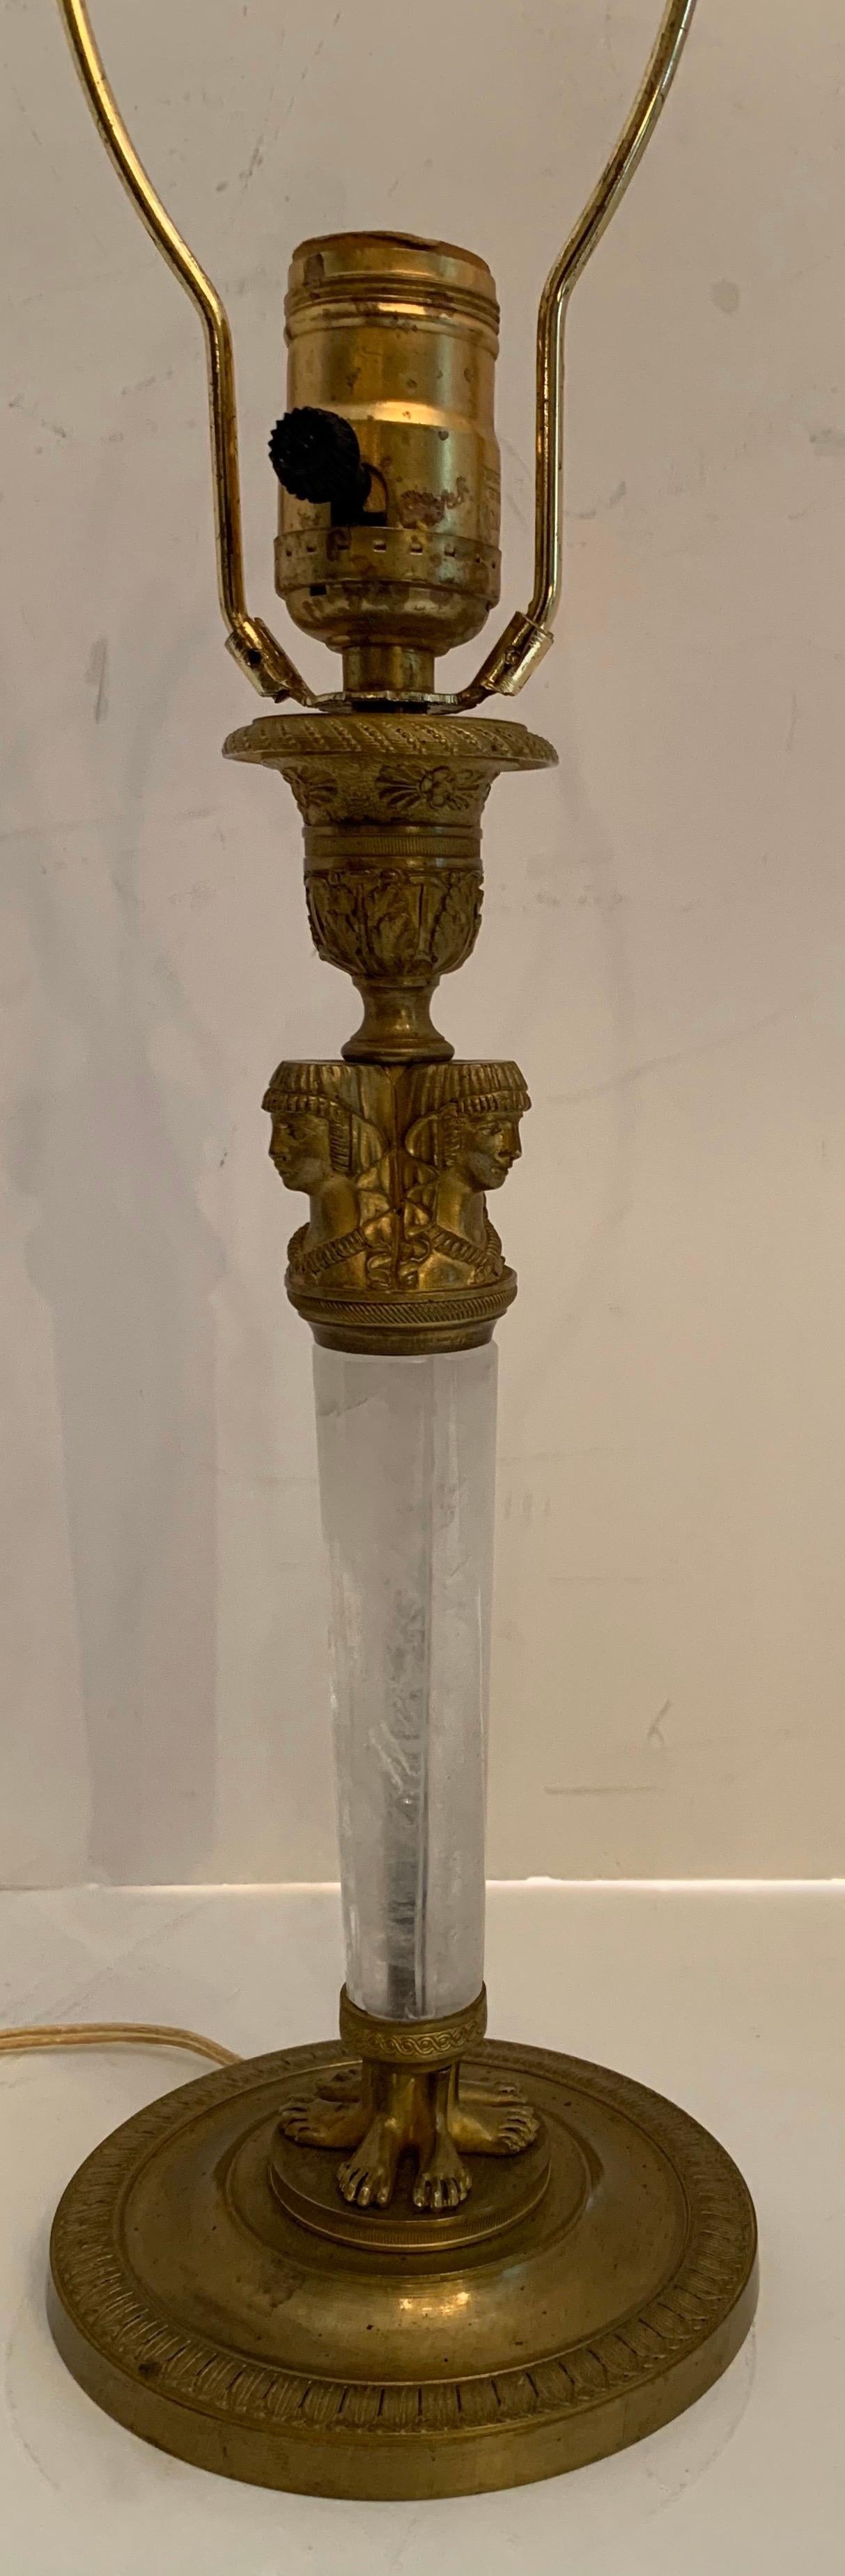 Wonderful Empire doré bronze rock crystal neoclassical figure candlestick lamp
Stamped made in France on base
Completely rewired.